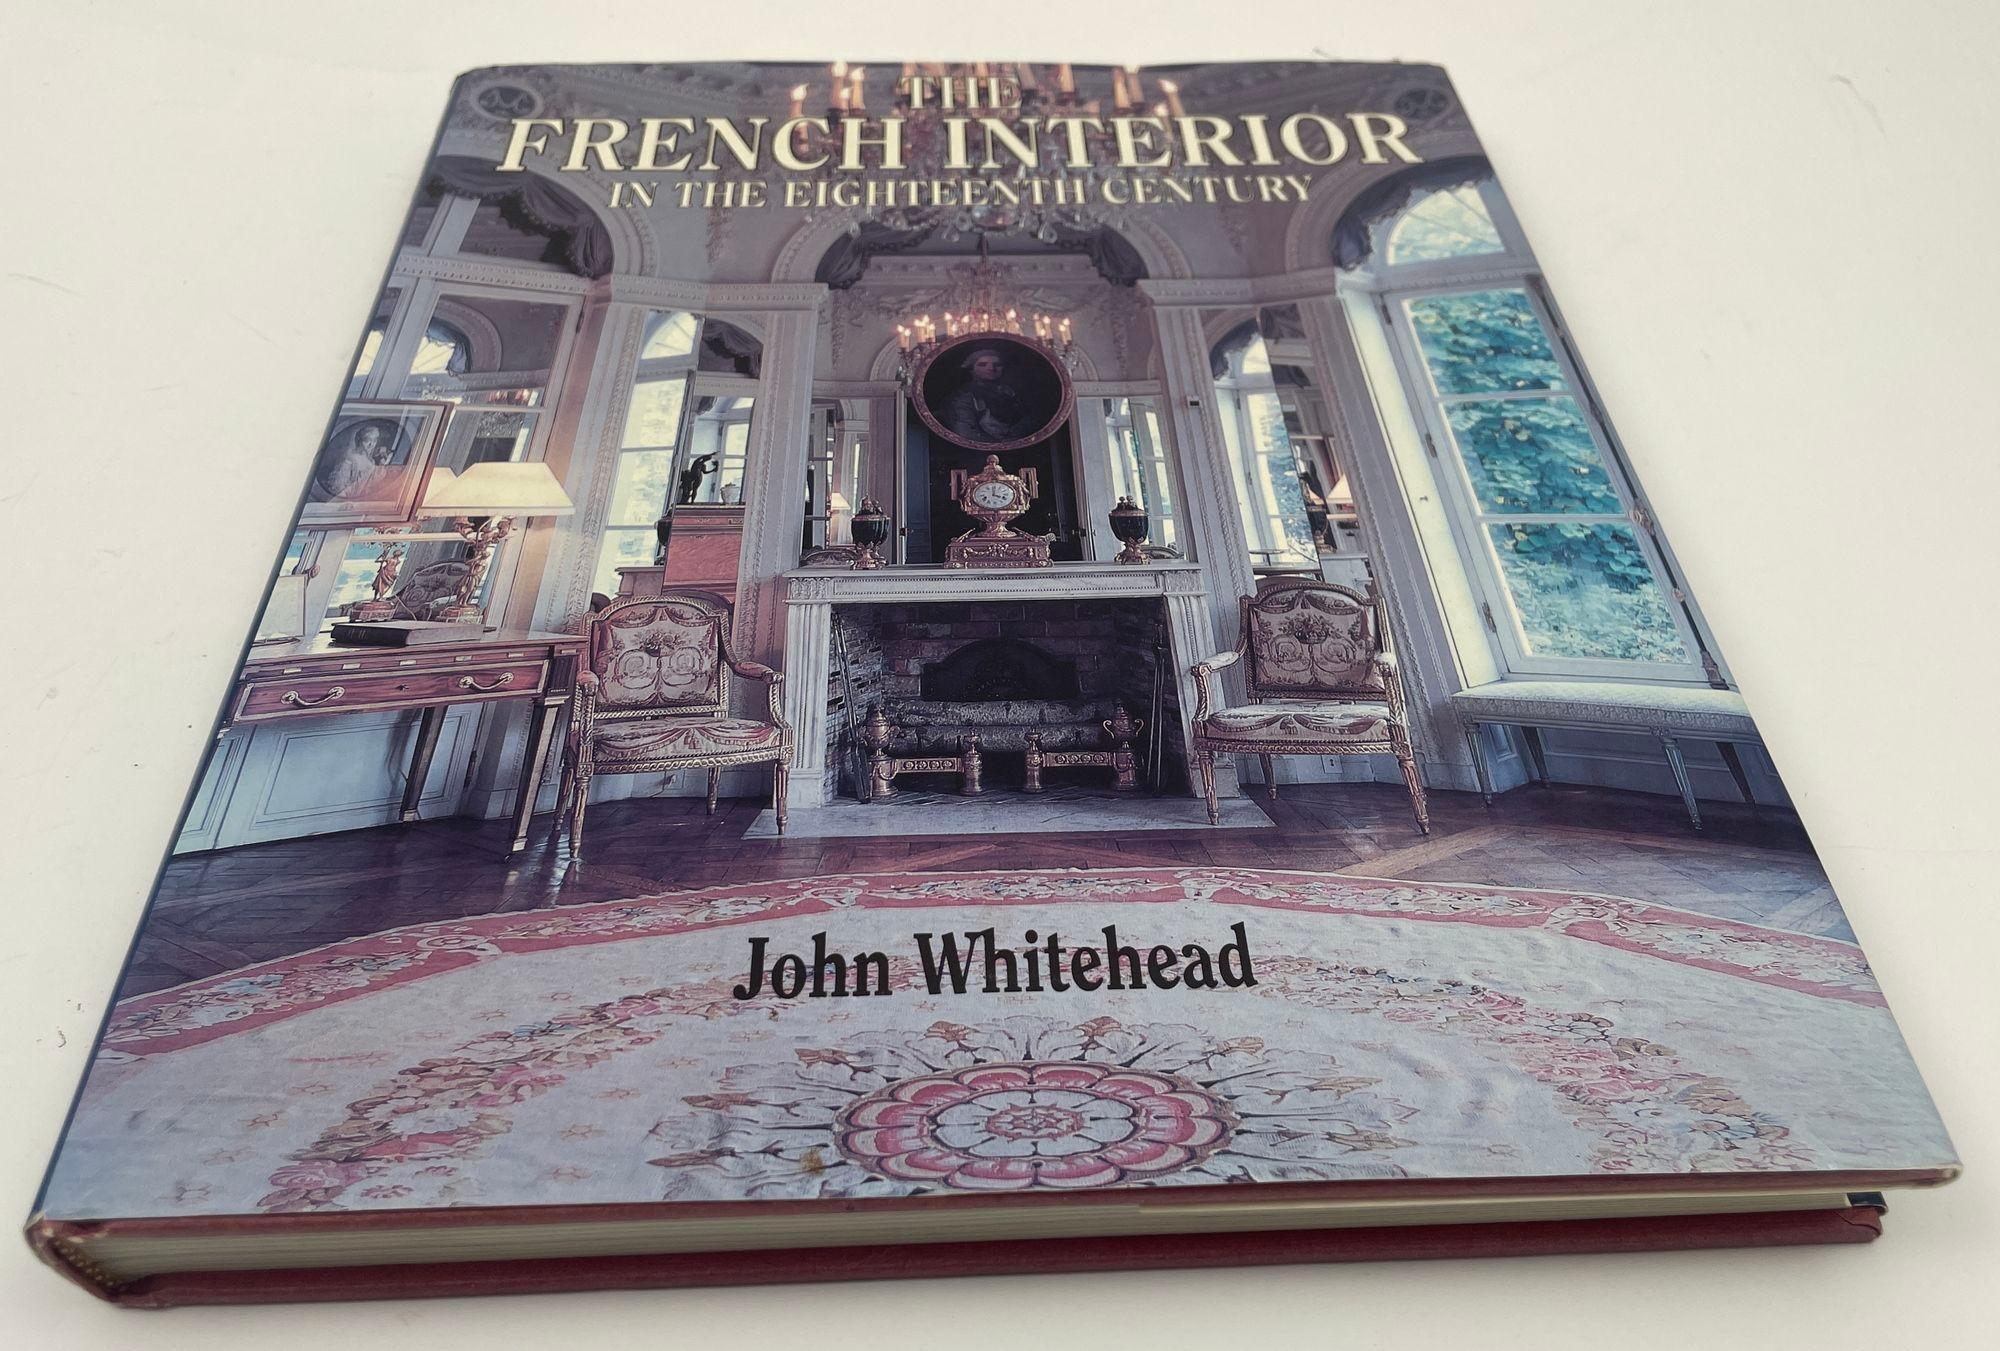 French Interiors of the Eighteenth Century Hardcover by John Whitehead 2009.
Hardcover coffee table book.
Red cloth boards with gilt spine lettering with color pictorial DJ, color illustrated end pages, 256pp, 263 illustrations, 247 in color.
From